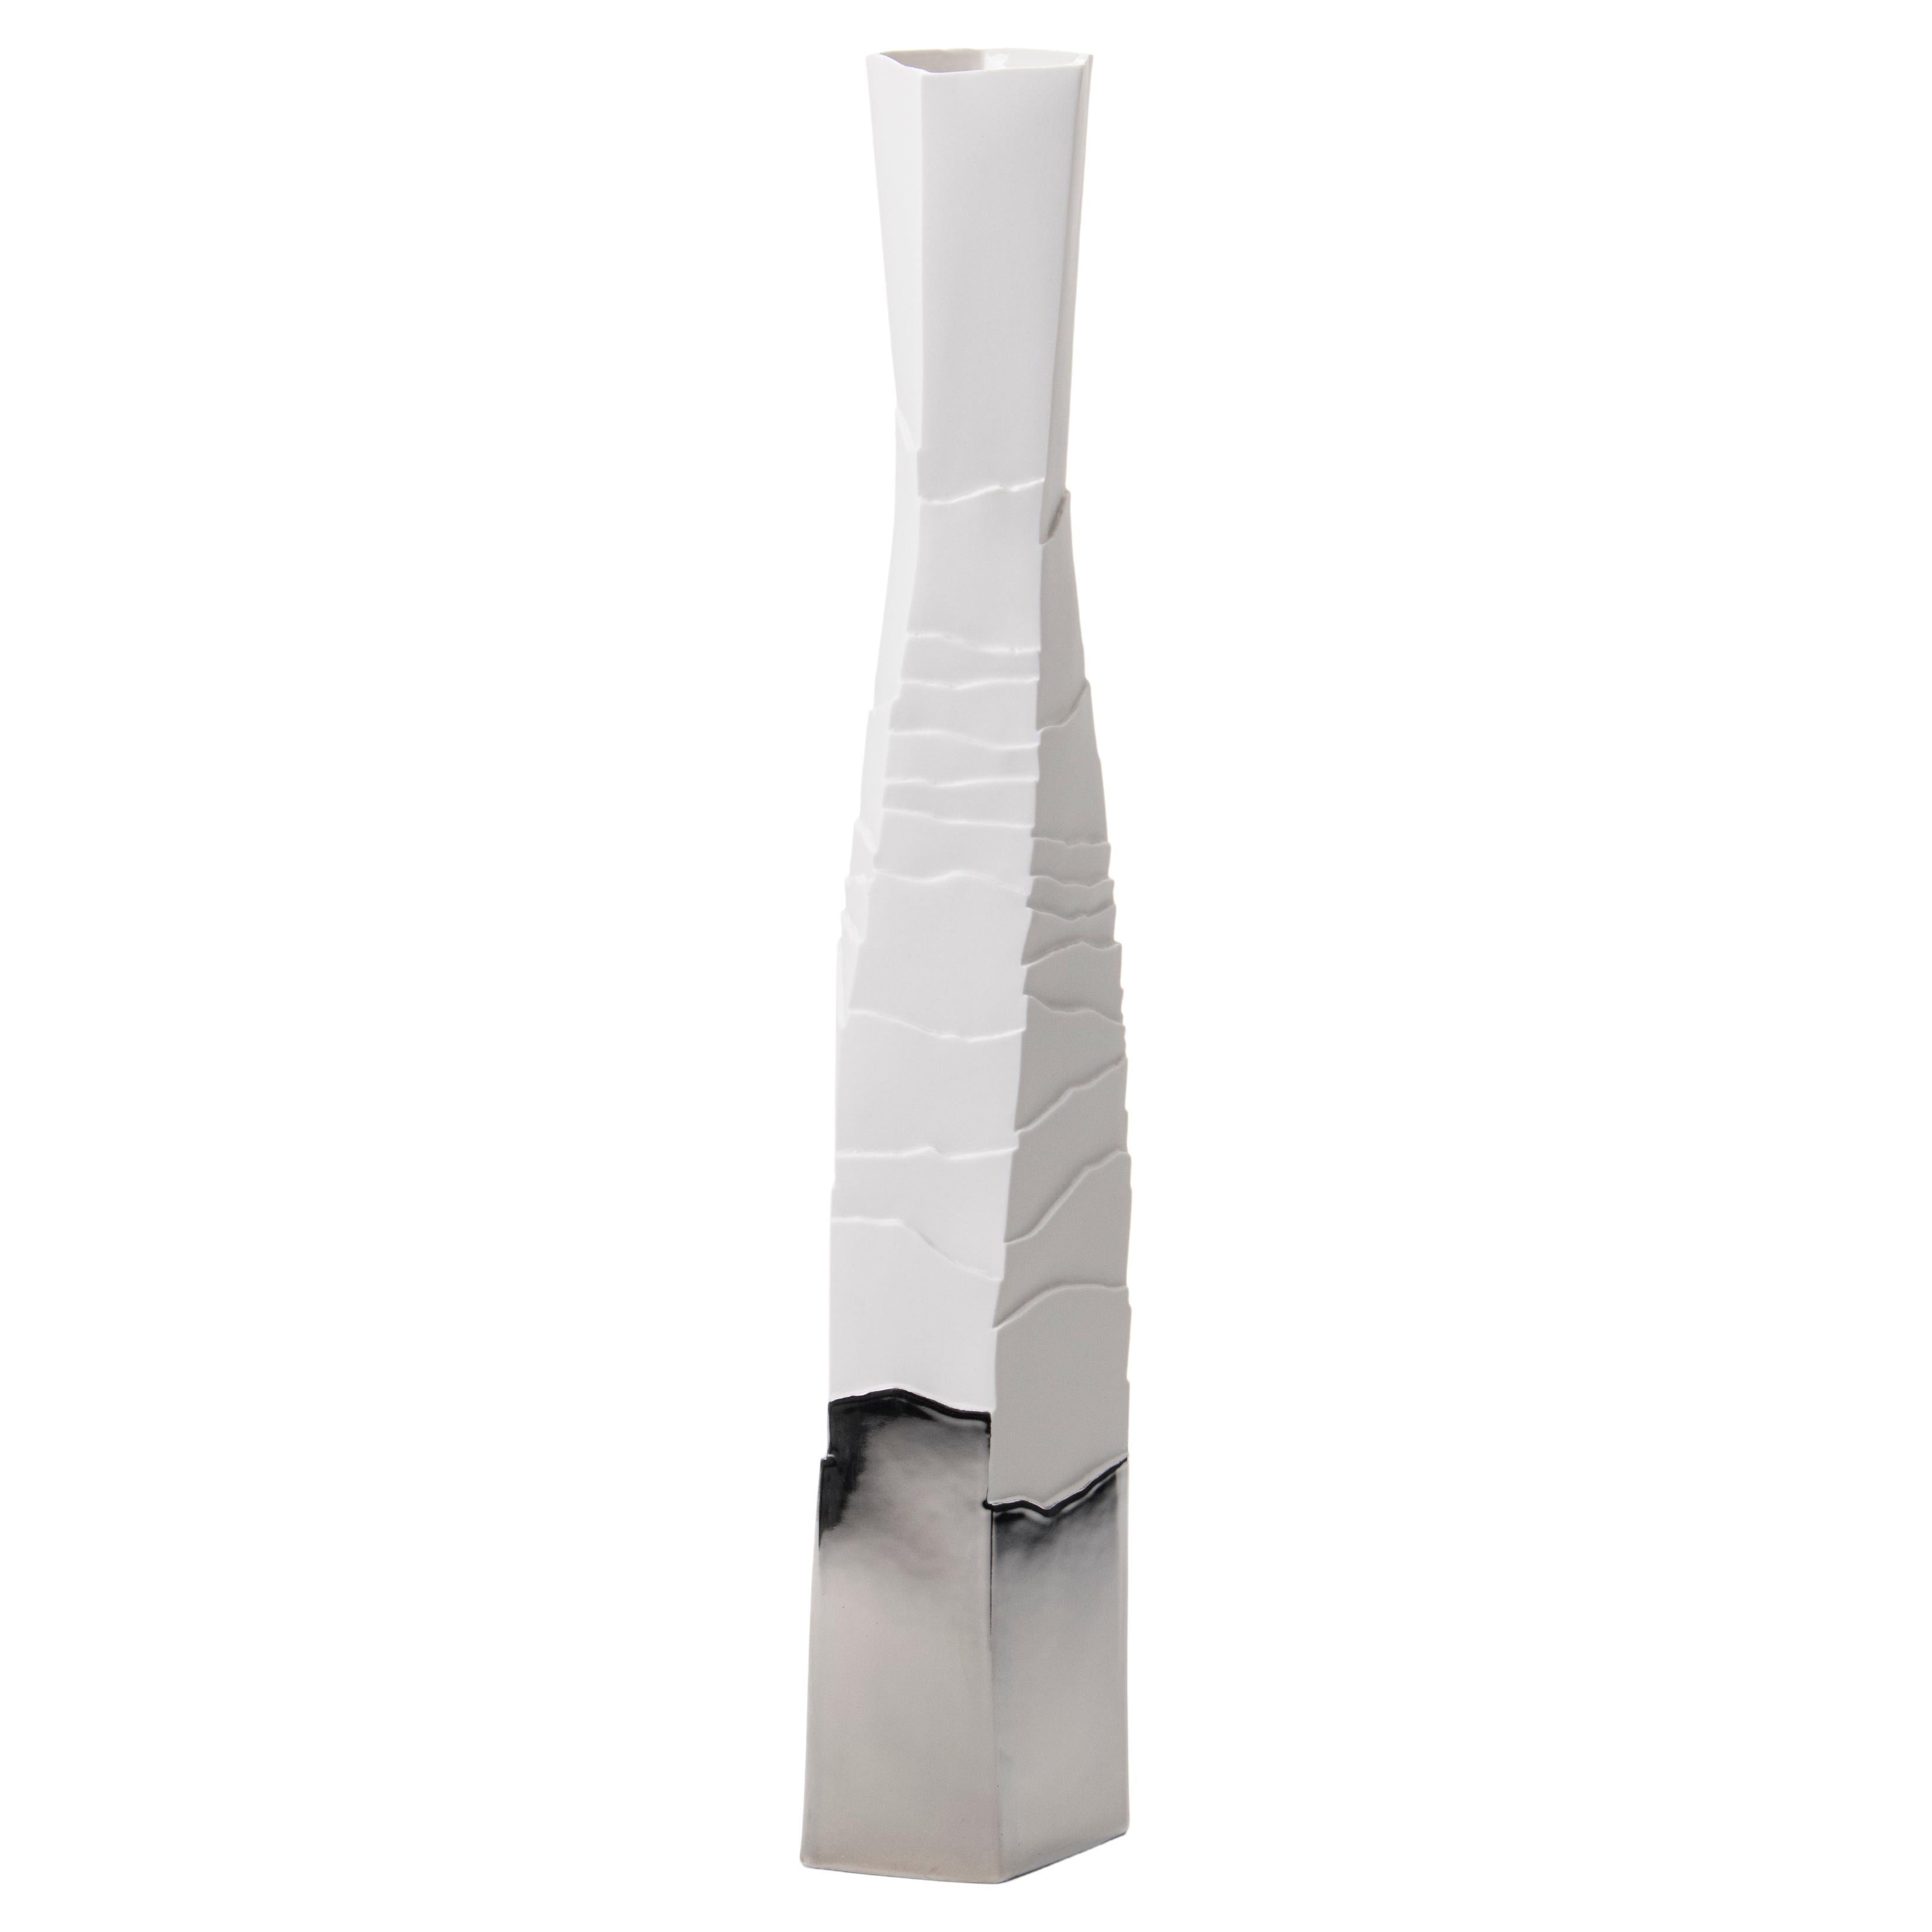 Contemporary Porcelain Vase Platinum Bottle White Ceramic Hand-Painted Italy Fos For Sale